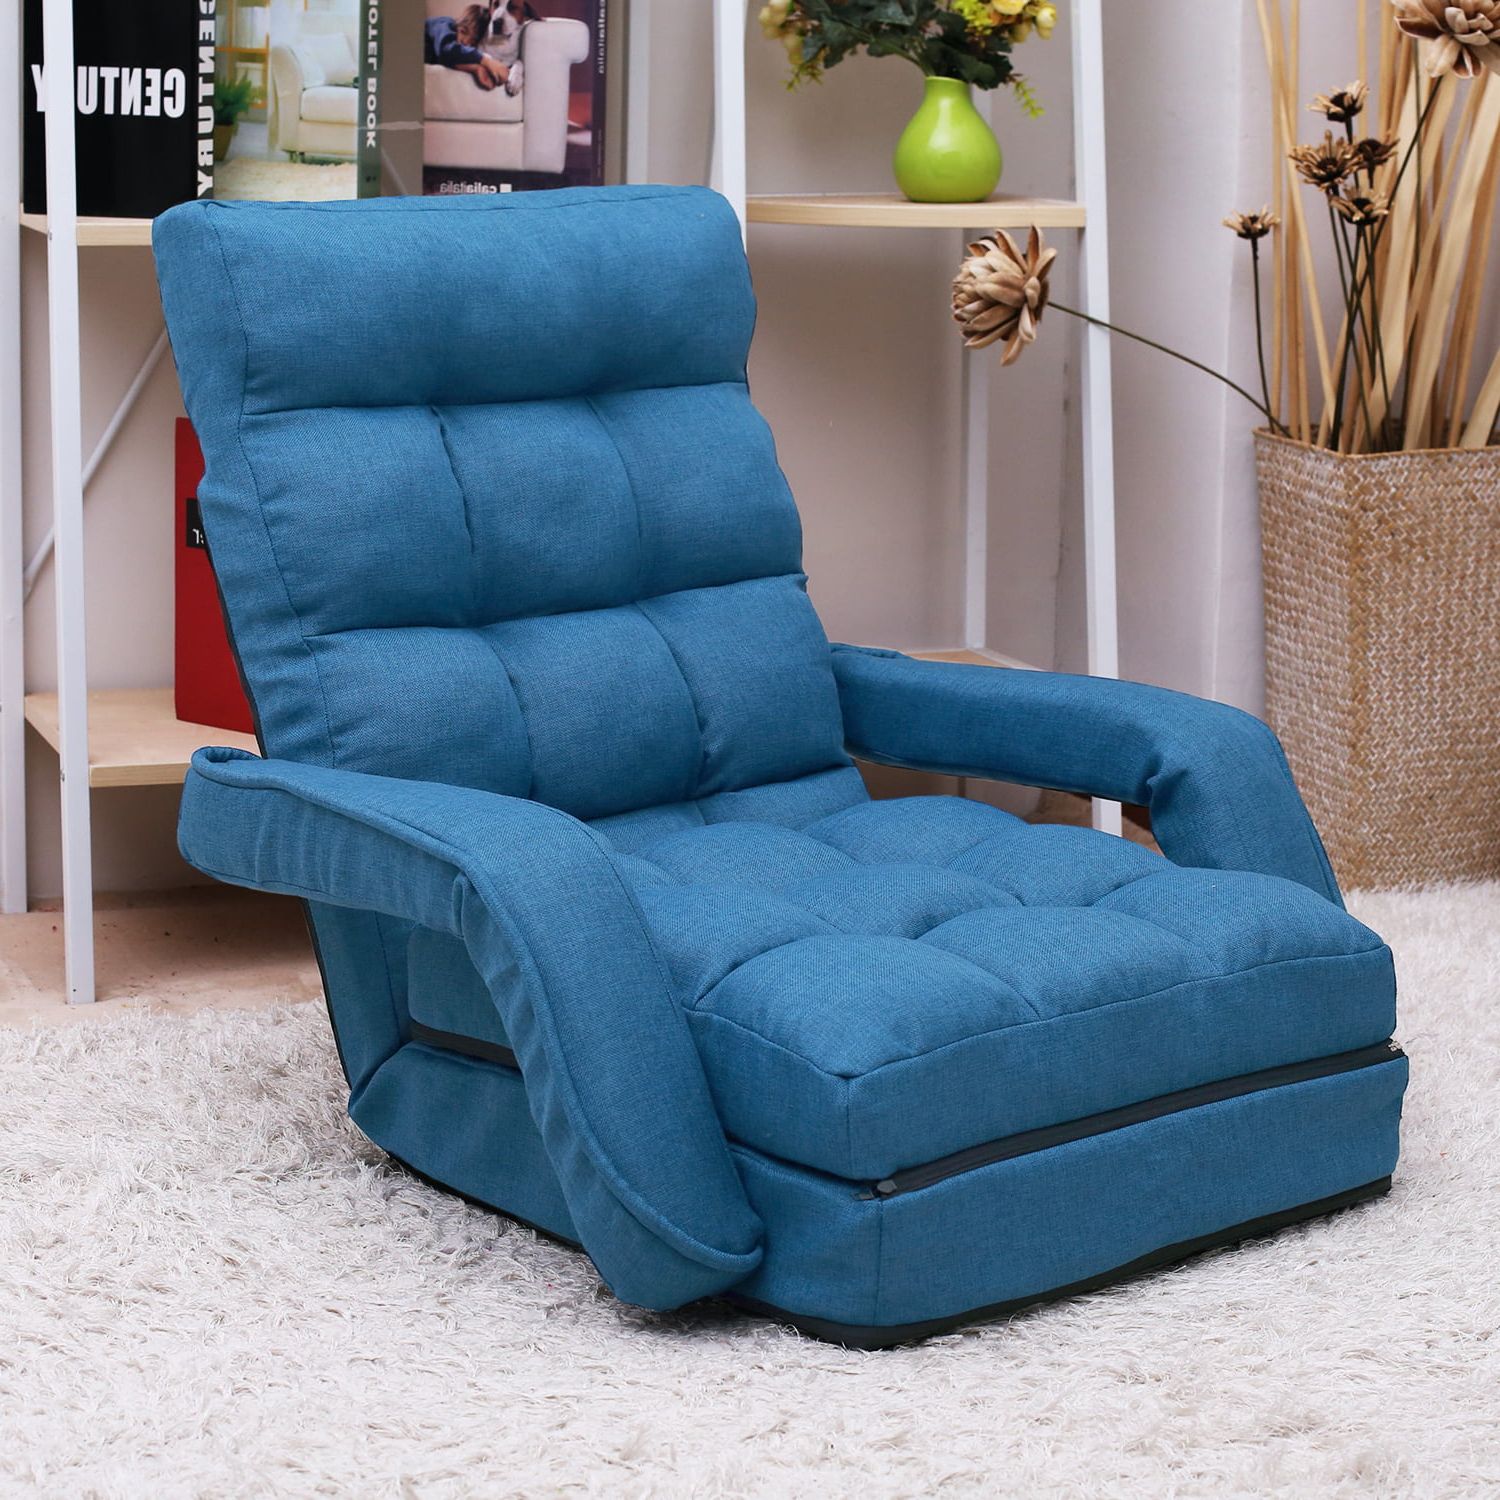 Furniture 2 In 1 Folding Lazy Sofa Lounger Floor Gaming Armchair Bed In 2 In 1 Foldable Sofas (View 5 of 20)